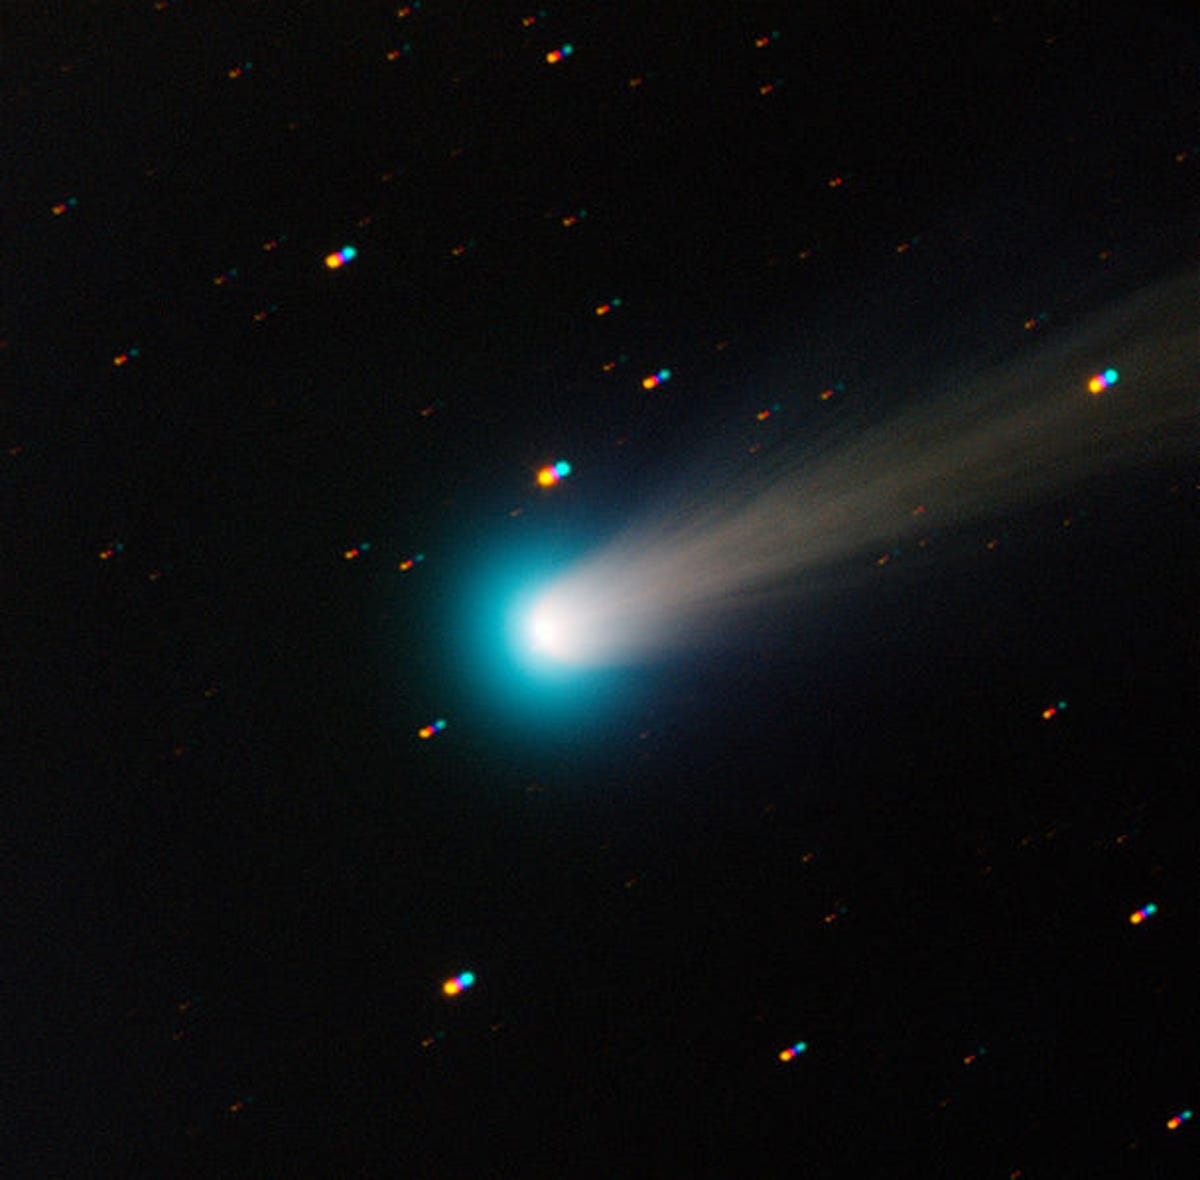 609px-Comet_ISON_(C-2012_S1)_by_TRAPPIST_on_2013-11-15.jpg